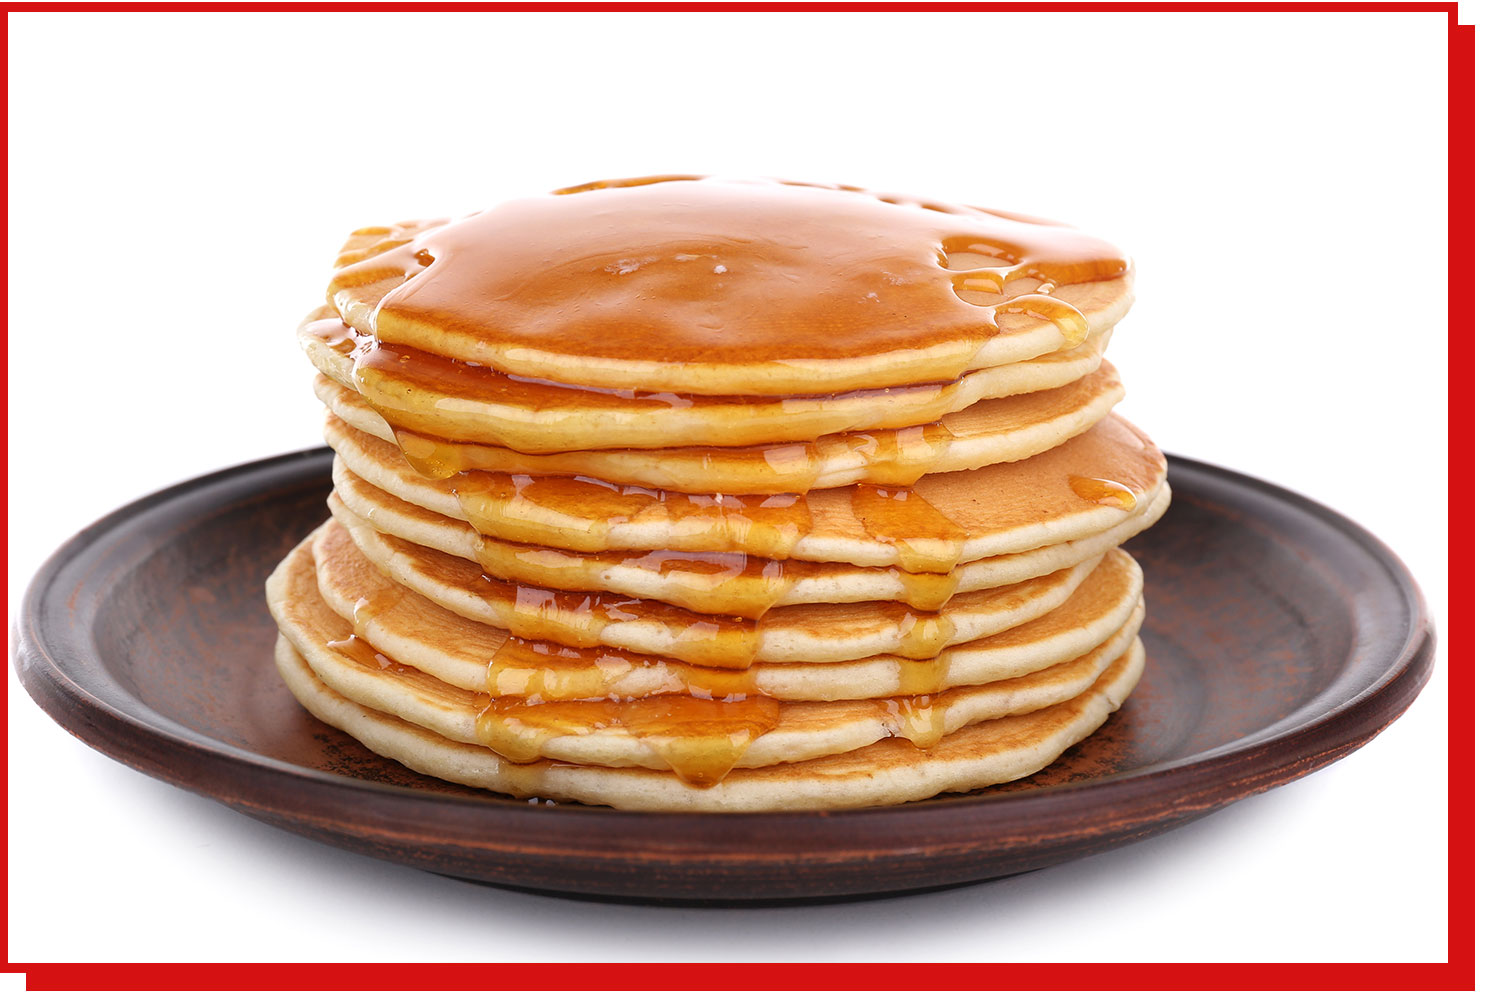 A stack of panckes with syrup